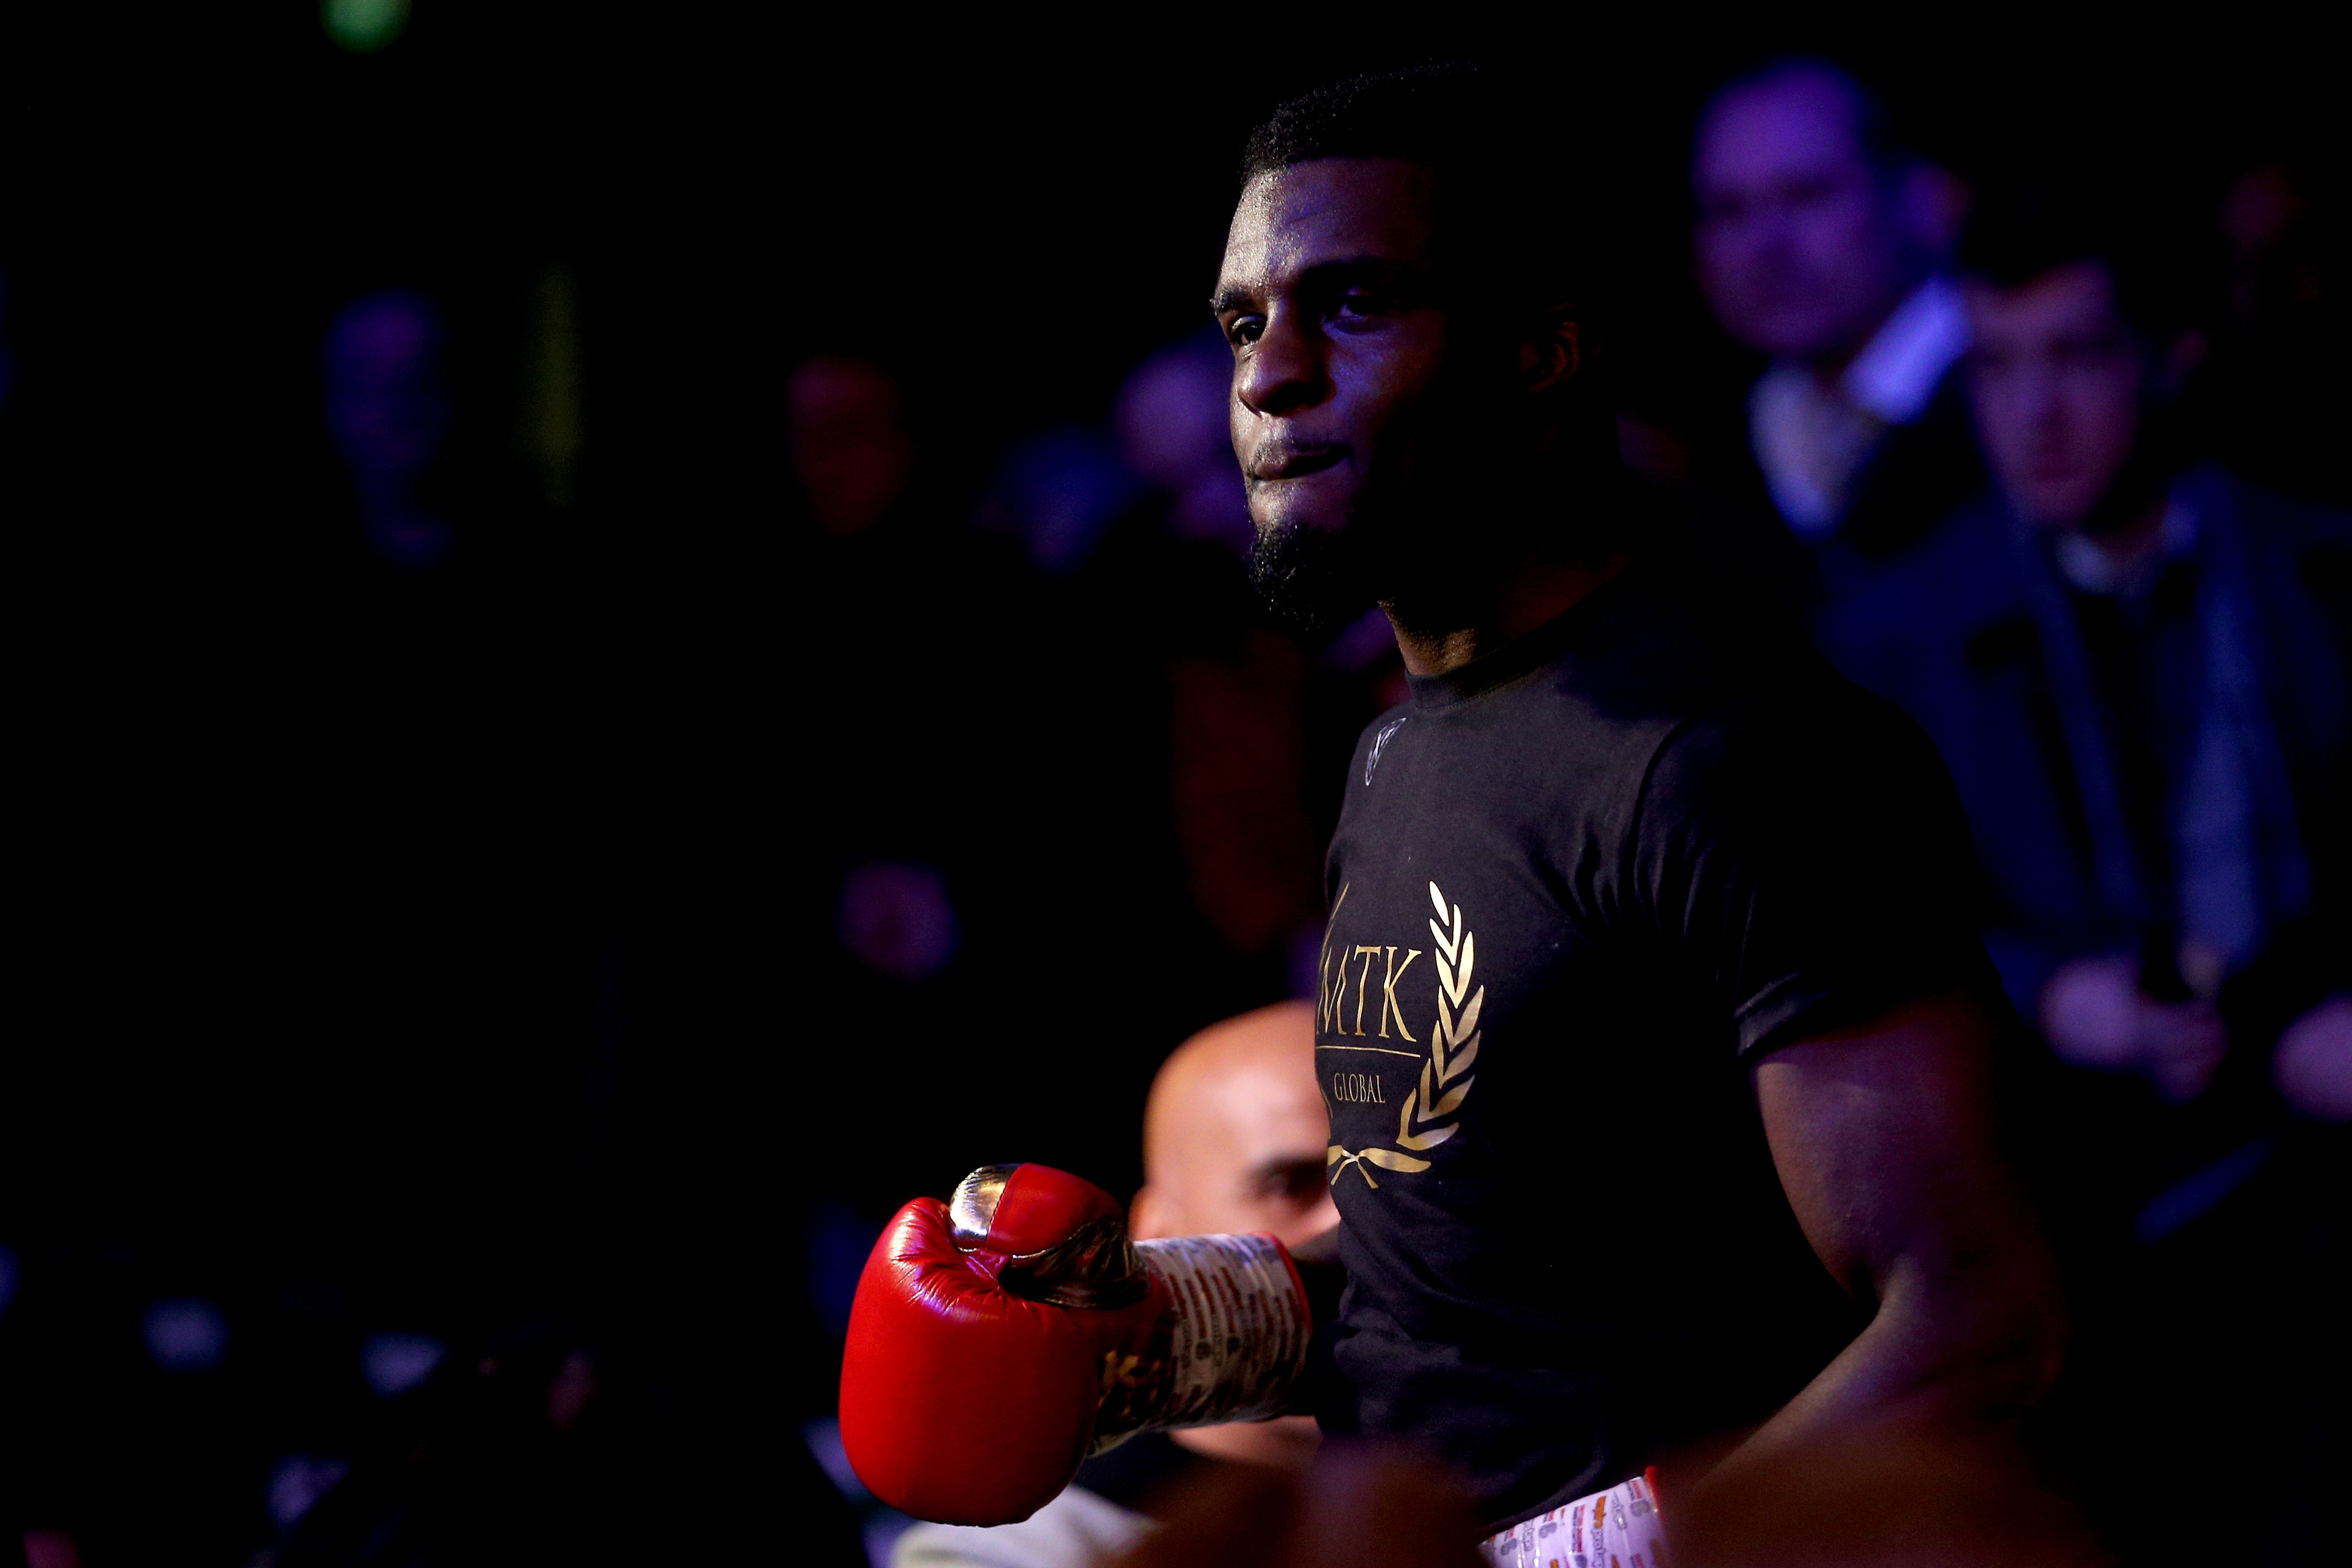 Ohara Davies walks to the ring prior to the MTK Global Golden Contract Super-Lightweight Semi-Final fight between Ohara Davies and Jeff Ofori at York Hall on February 21, 2020 in London, England.